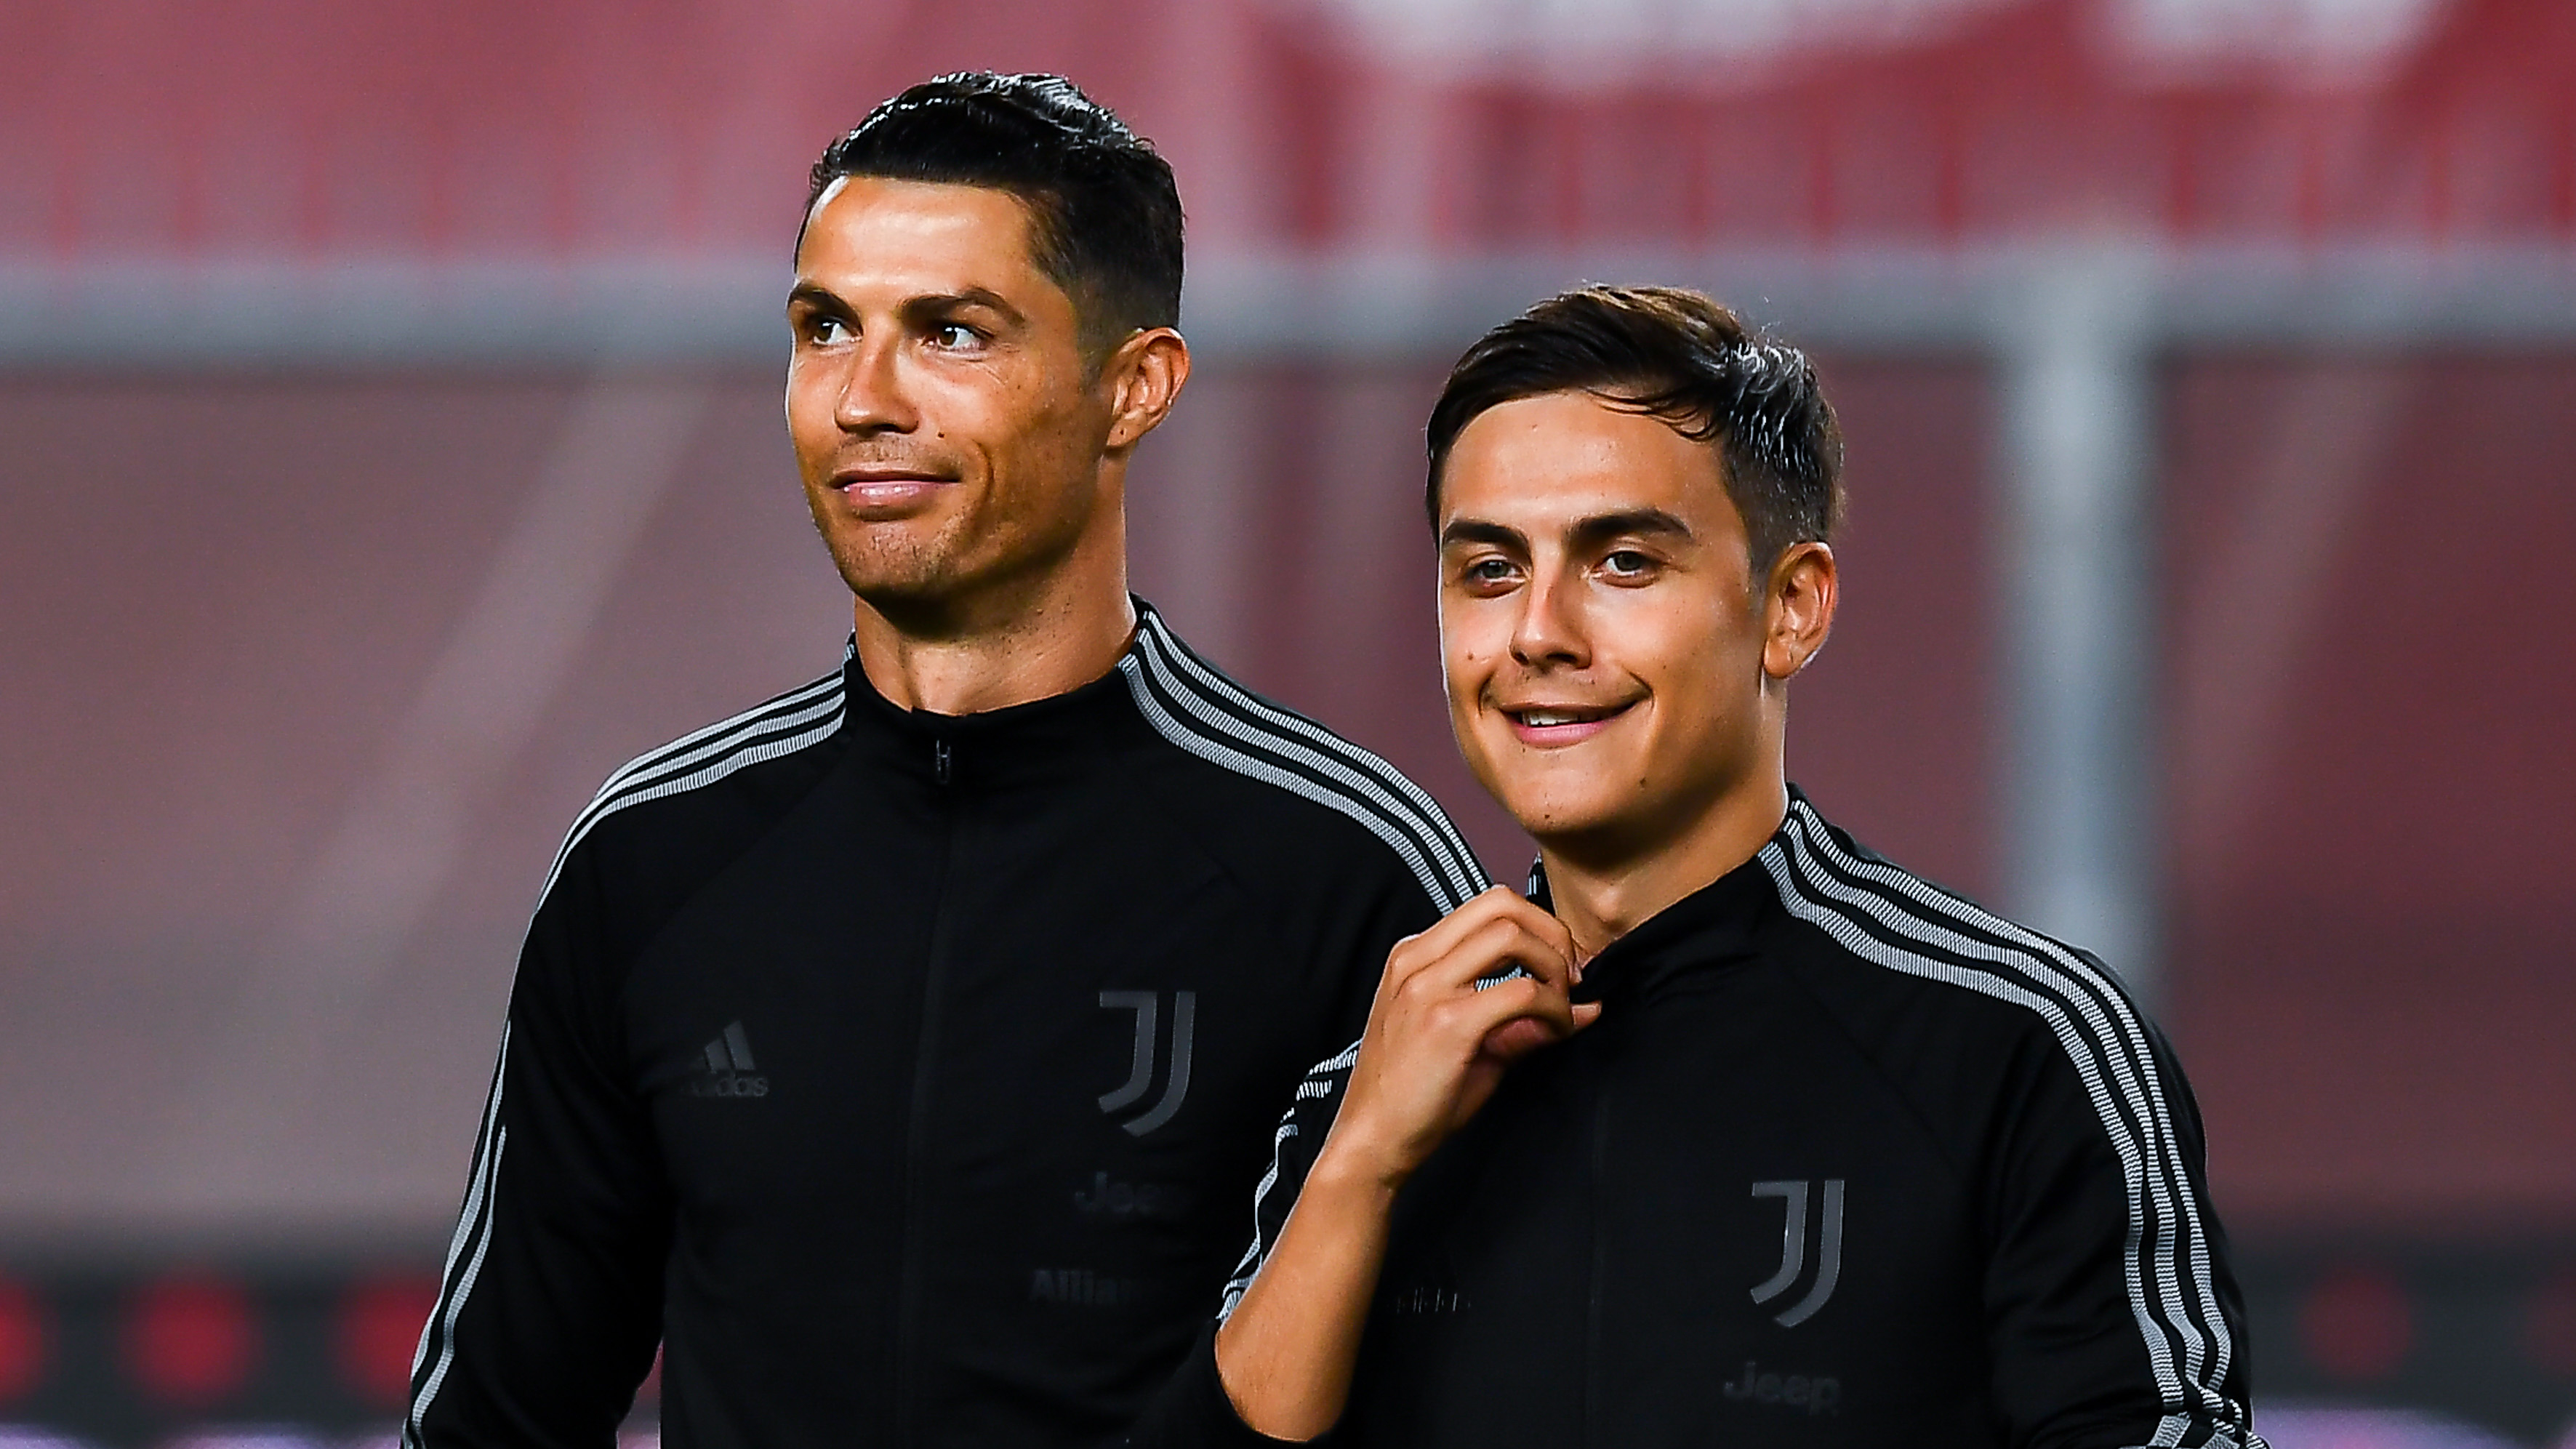 'Something has changed' - Ronaldo and Dybala working better together, admits Sarri